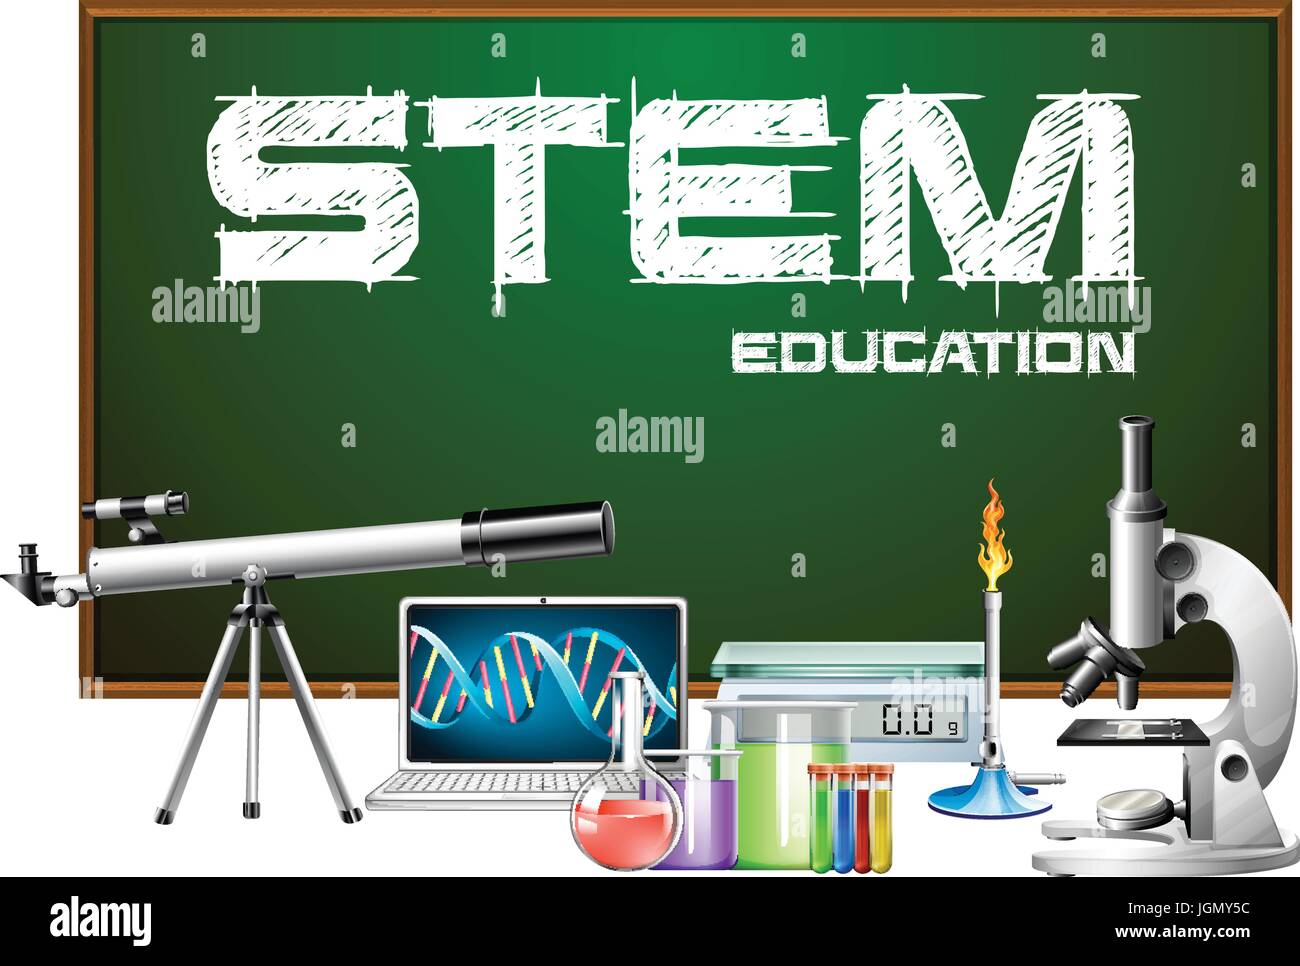 Stem education poster design with science equipments illustration Stock Vector